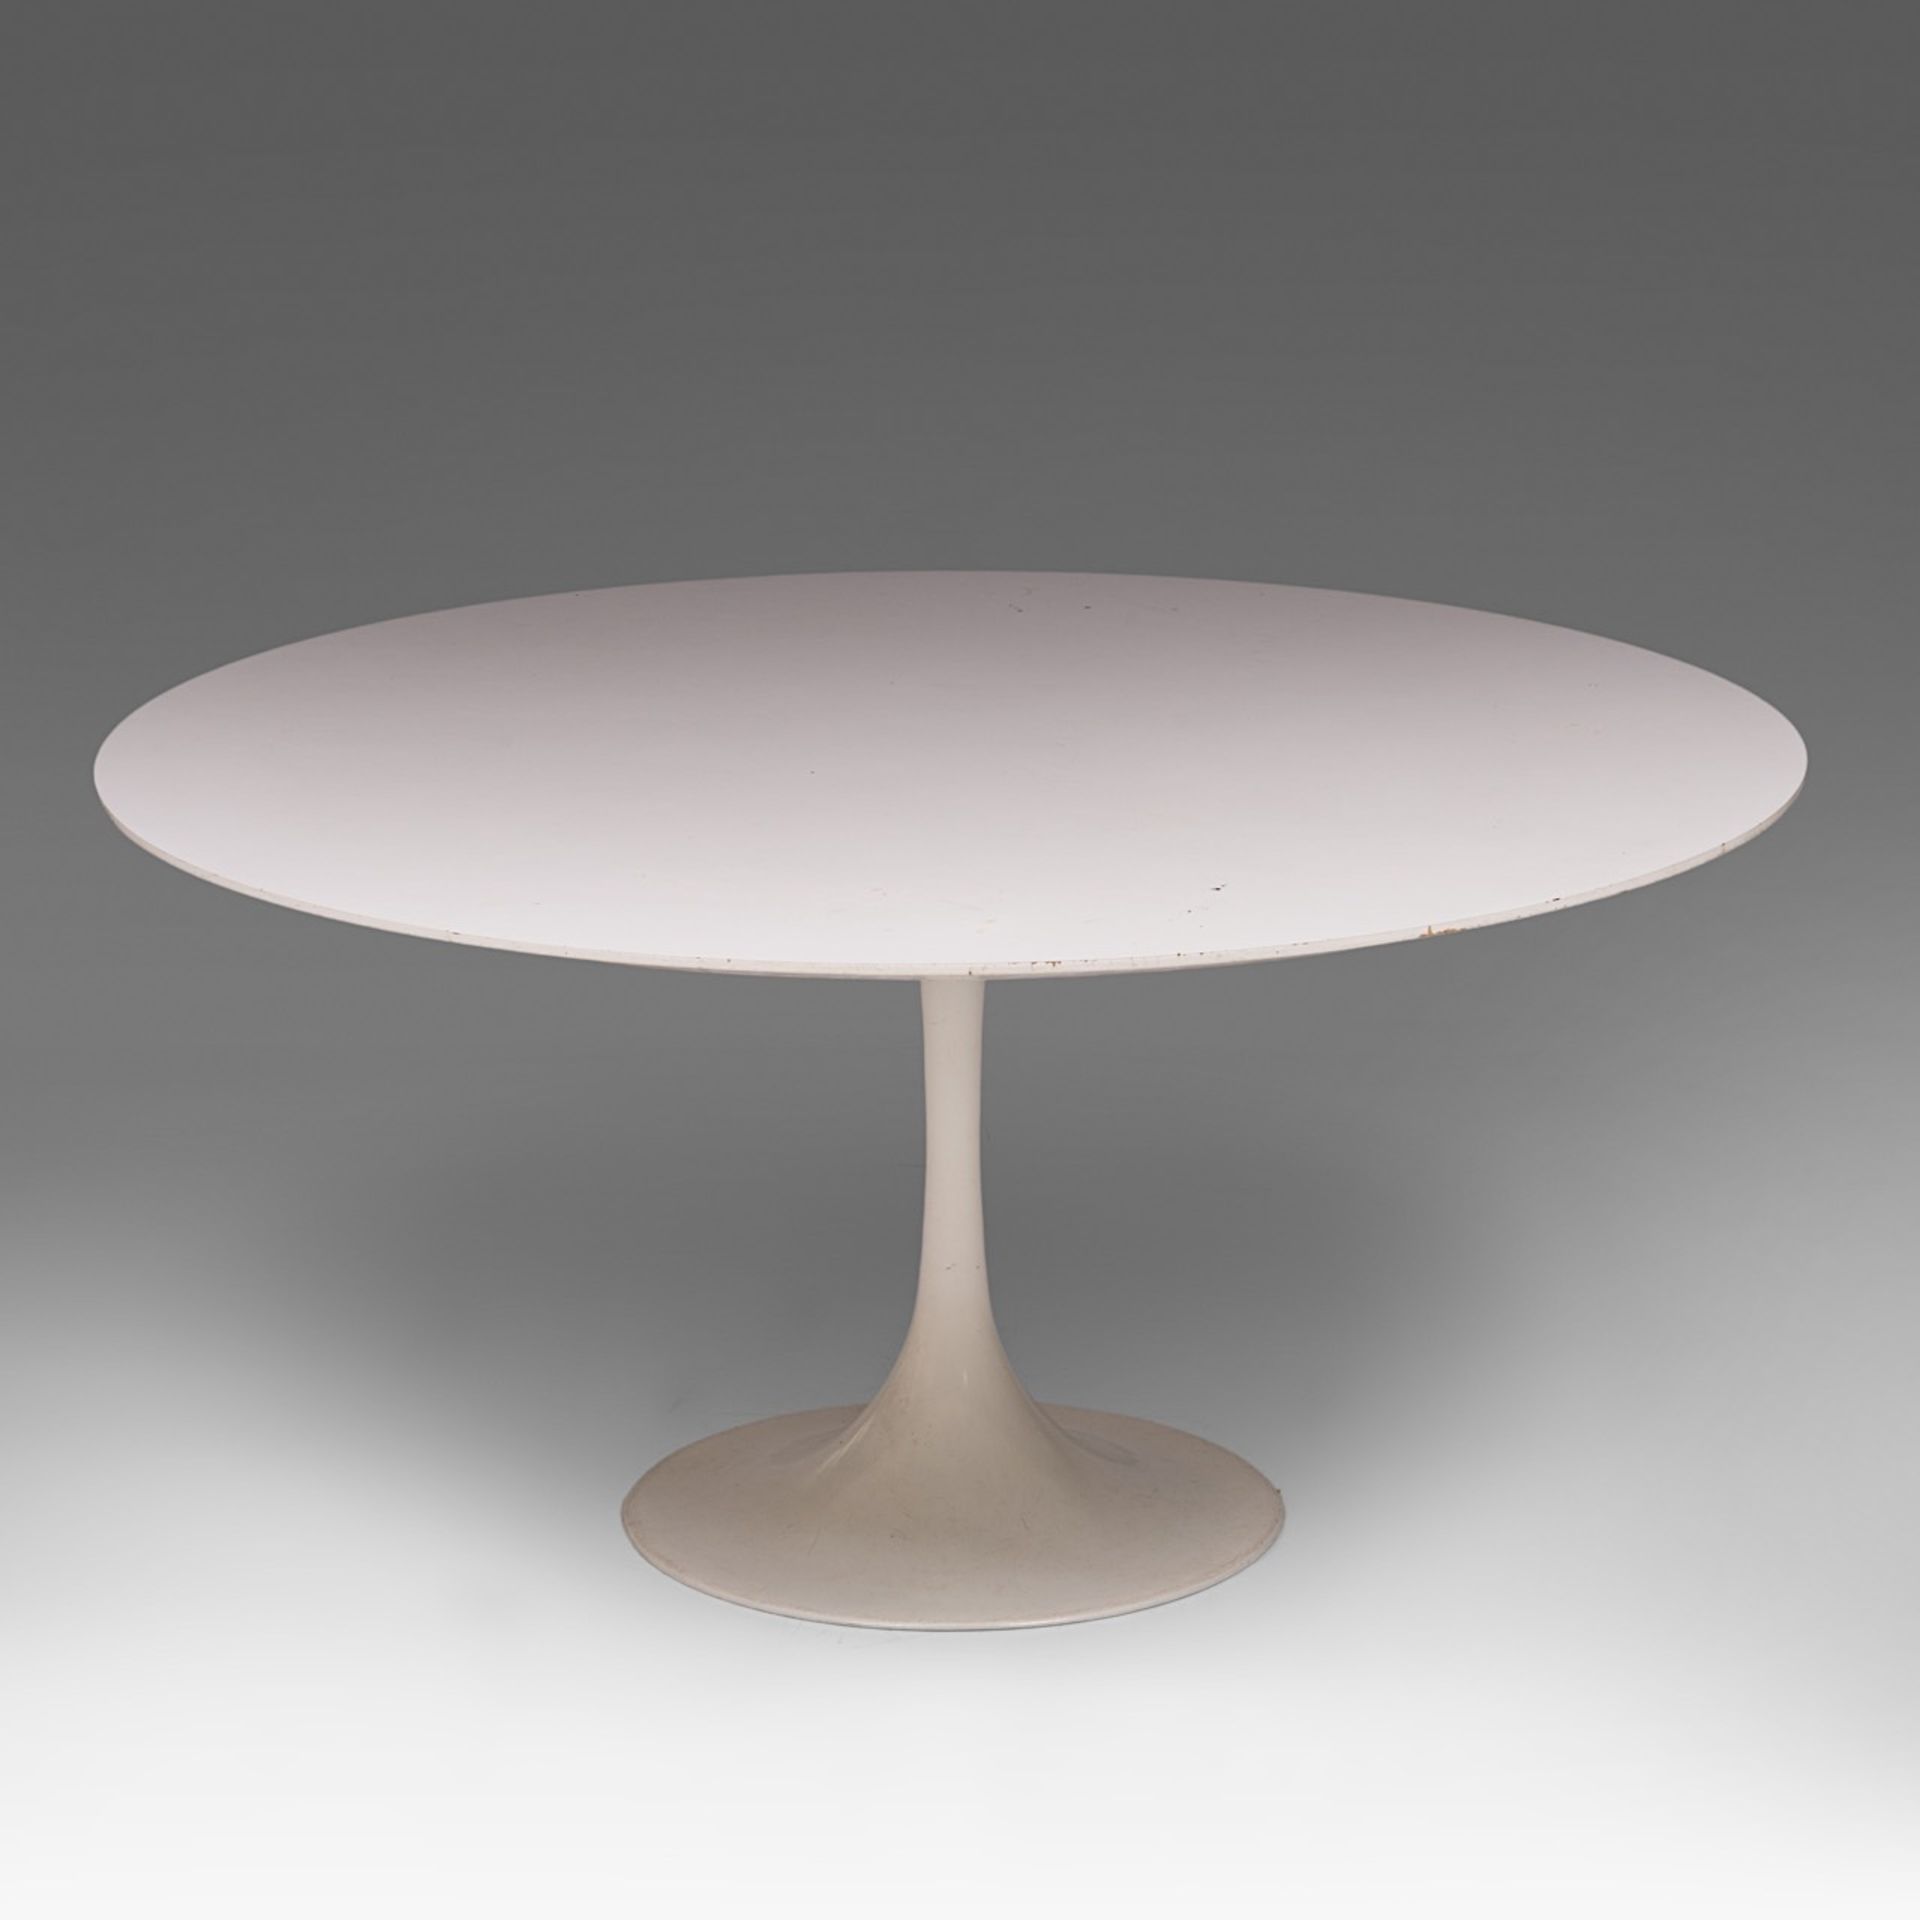 A vintage white coated 'Tulip' dining table, designed by Eero Saarinen for Knoll, H 72 - dia 150 cm - Bild 3 aus 6